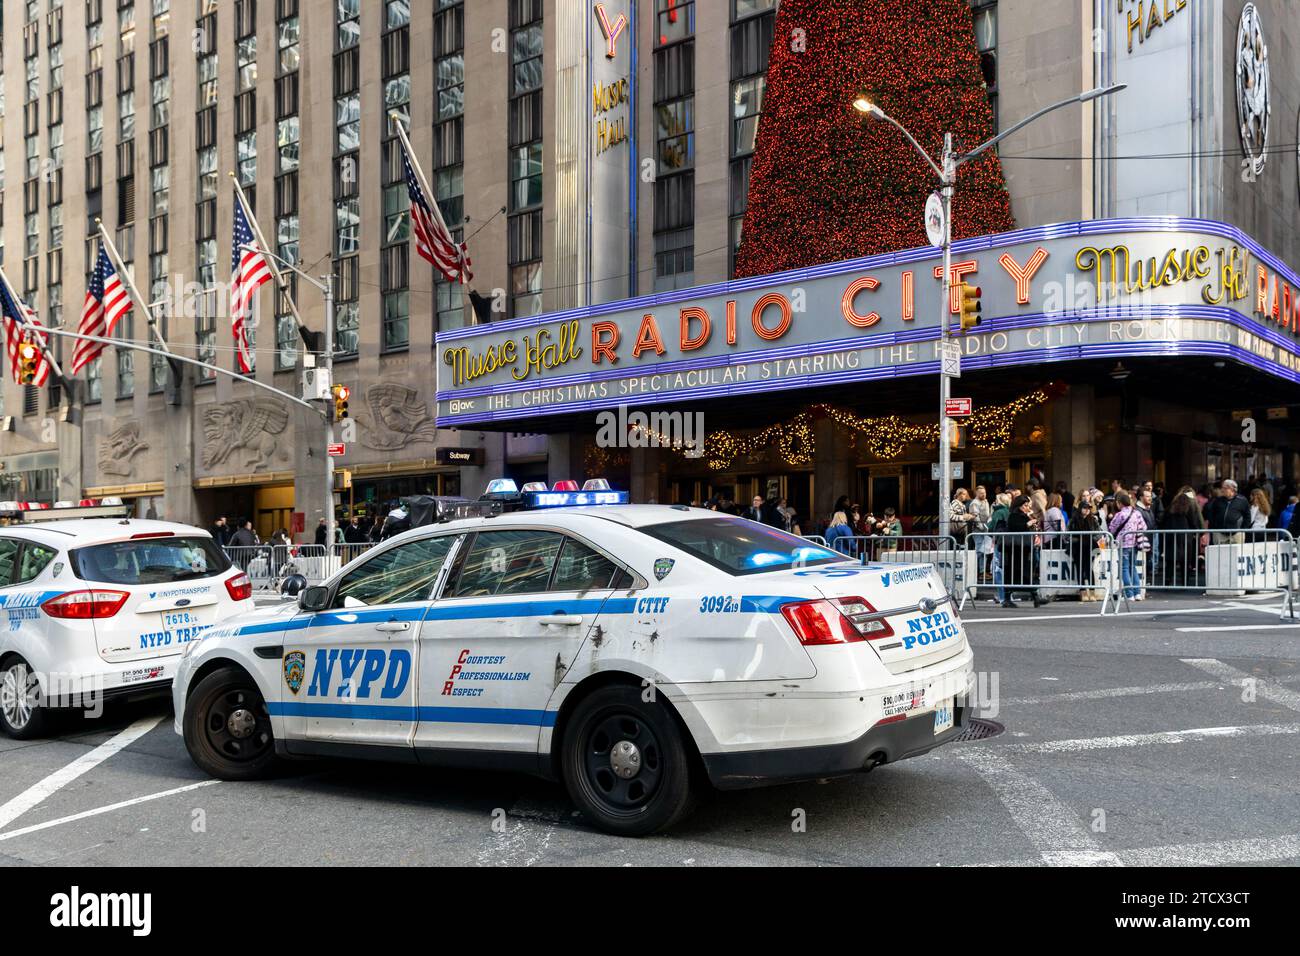 A New York Police Department cars sitting in the street outside of Radio City Music Hall during the Holidays. Stock Photo